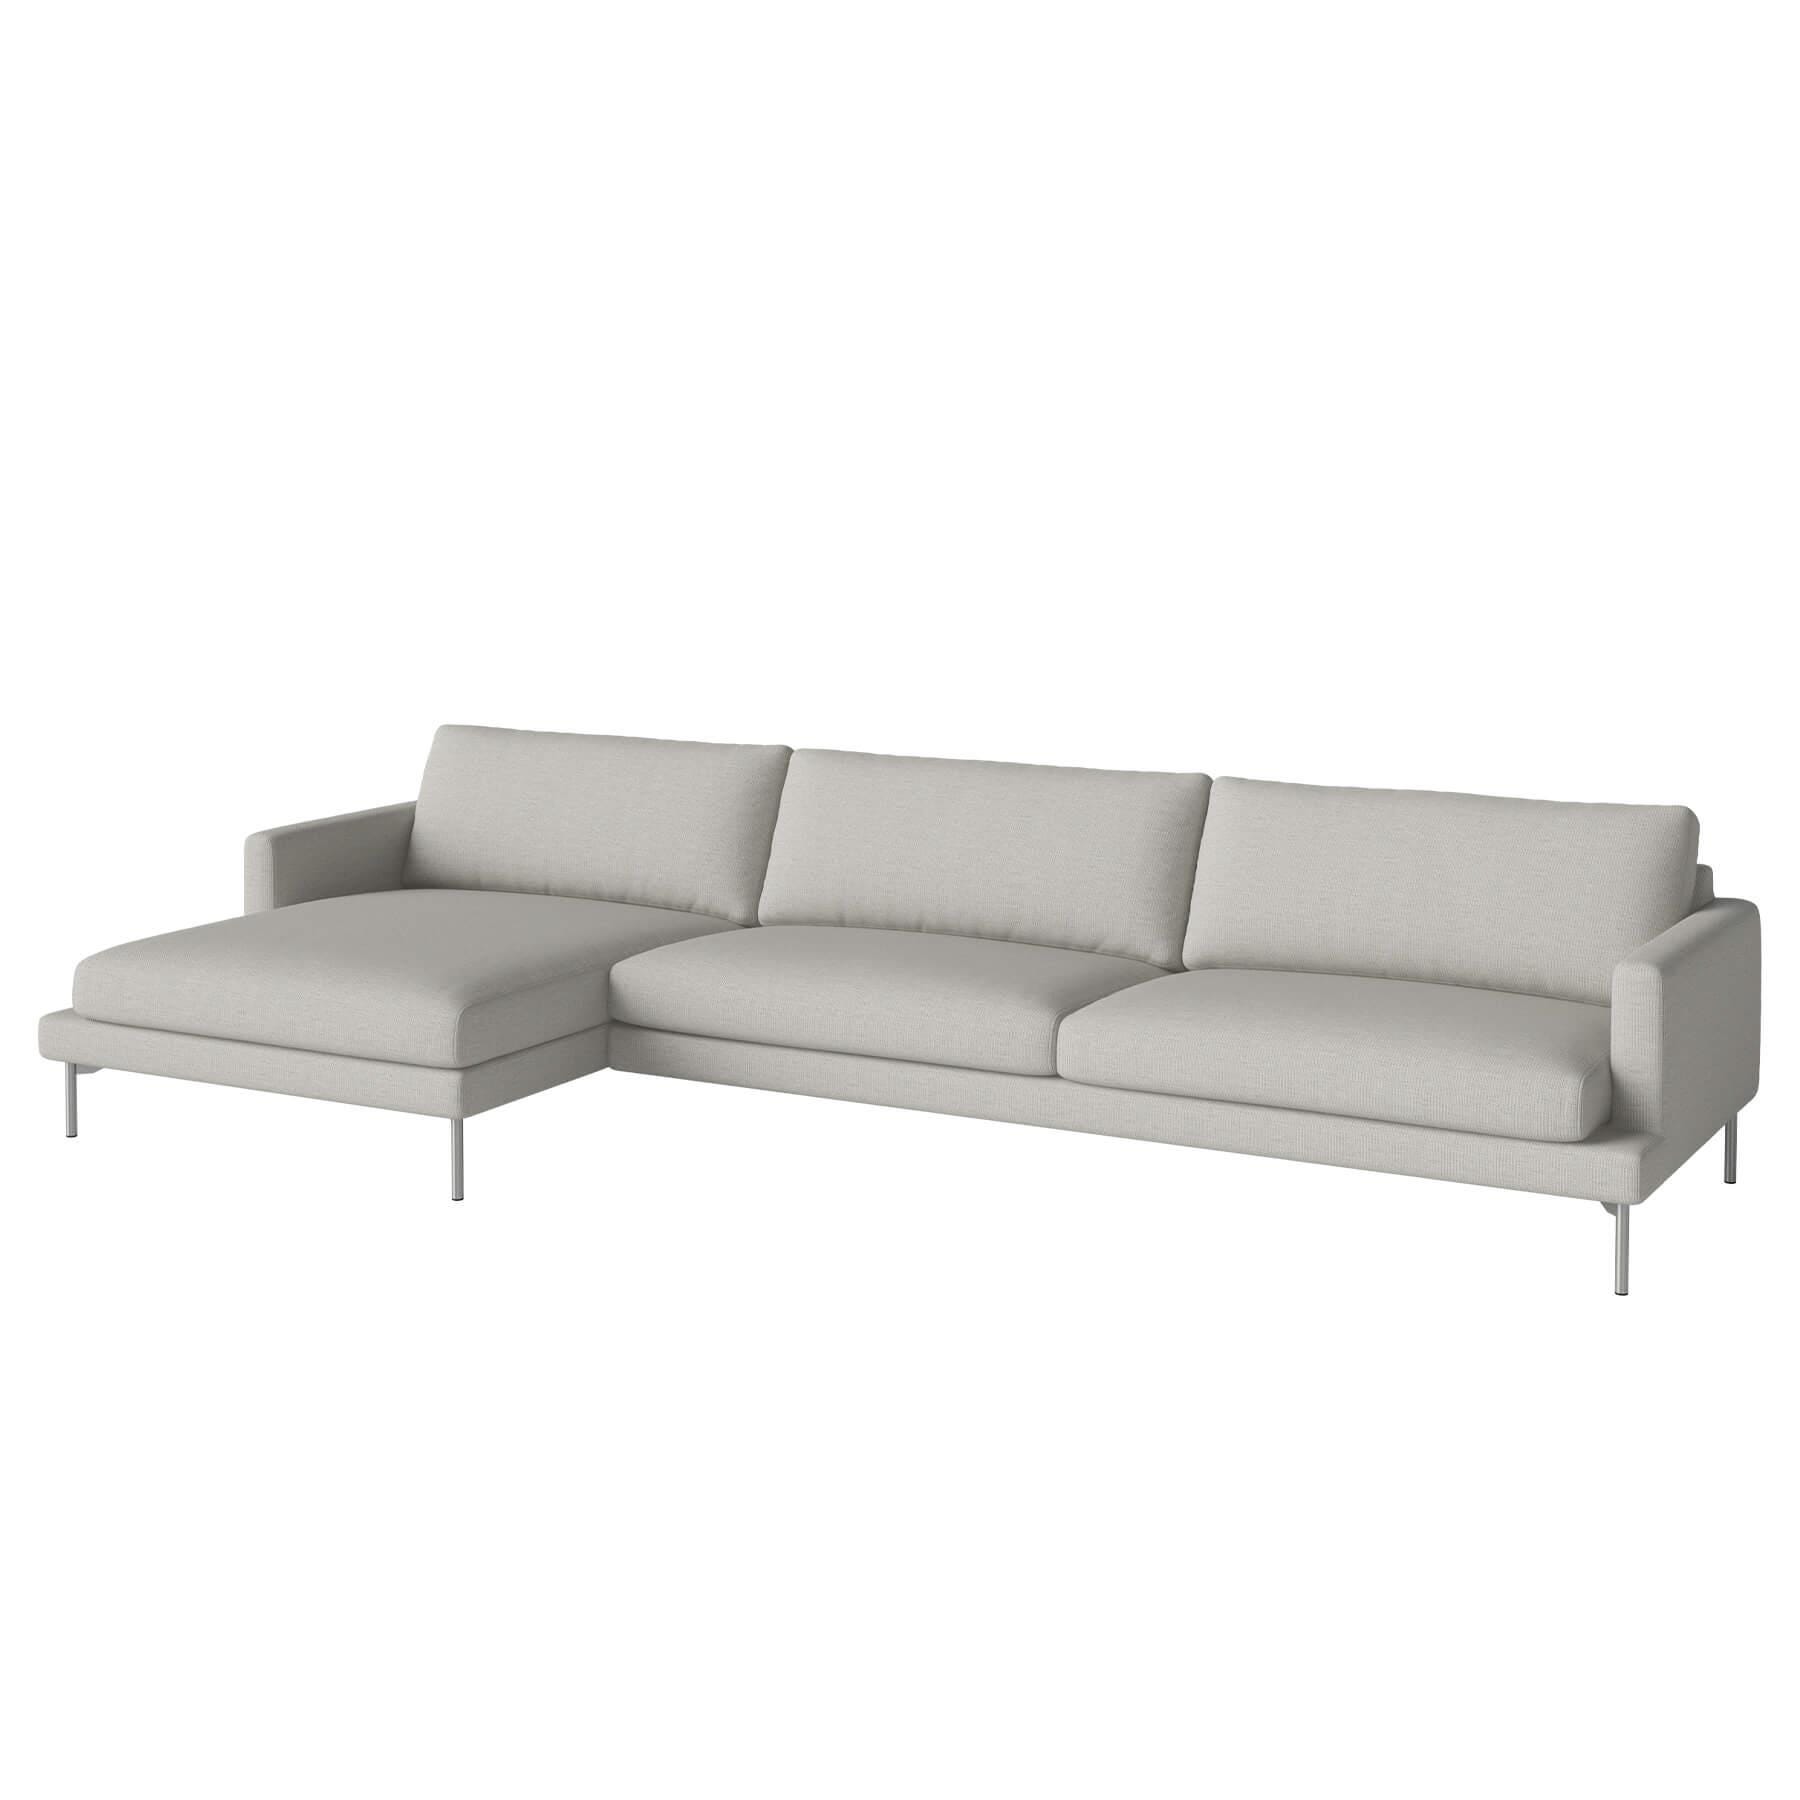 Bolia Veneda Sofa 45 Seater Sofa With Chaise Longue Brushed Steel London Dust Green Left Grey Designer Furniture From Holloways Of Ludlow